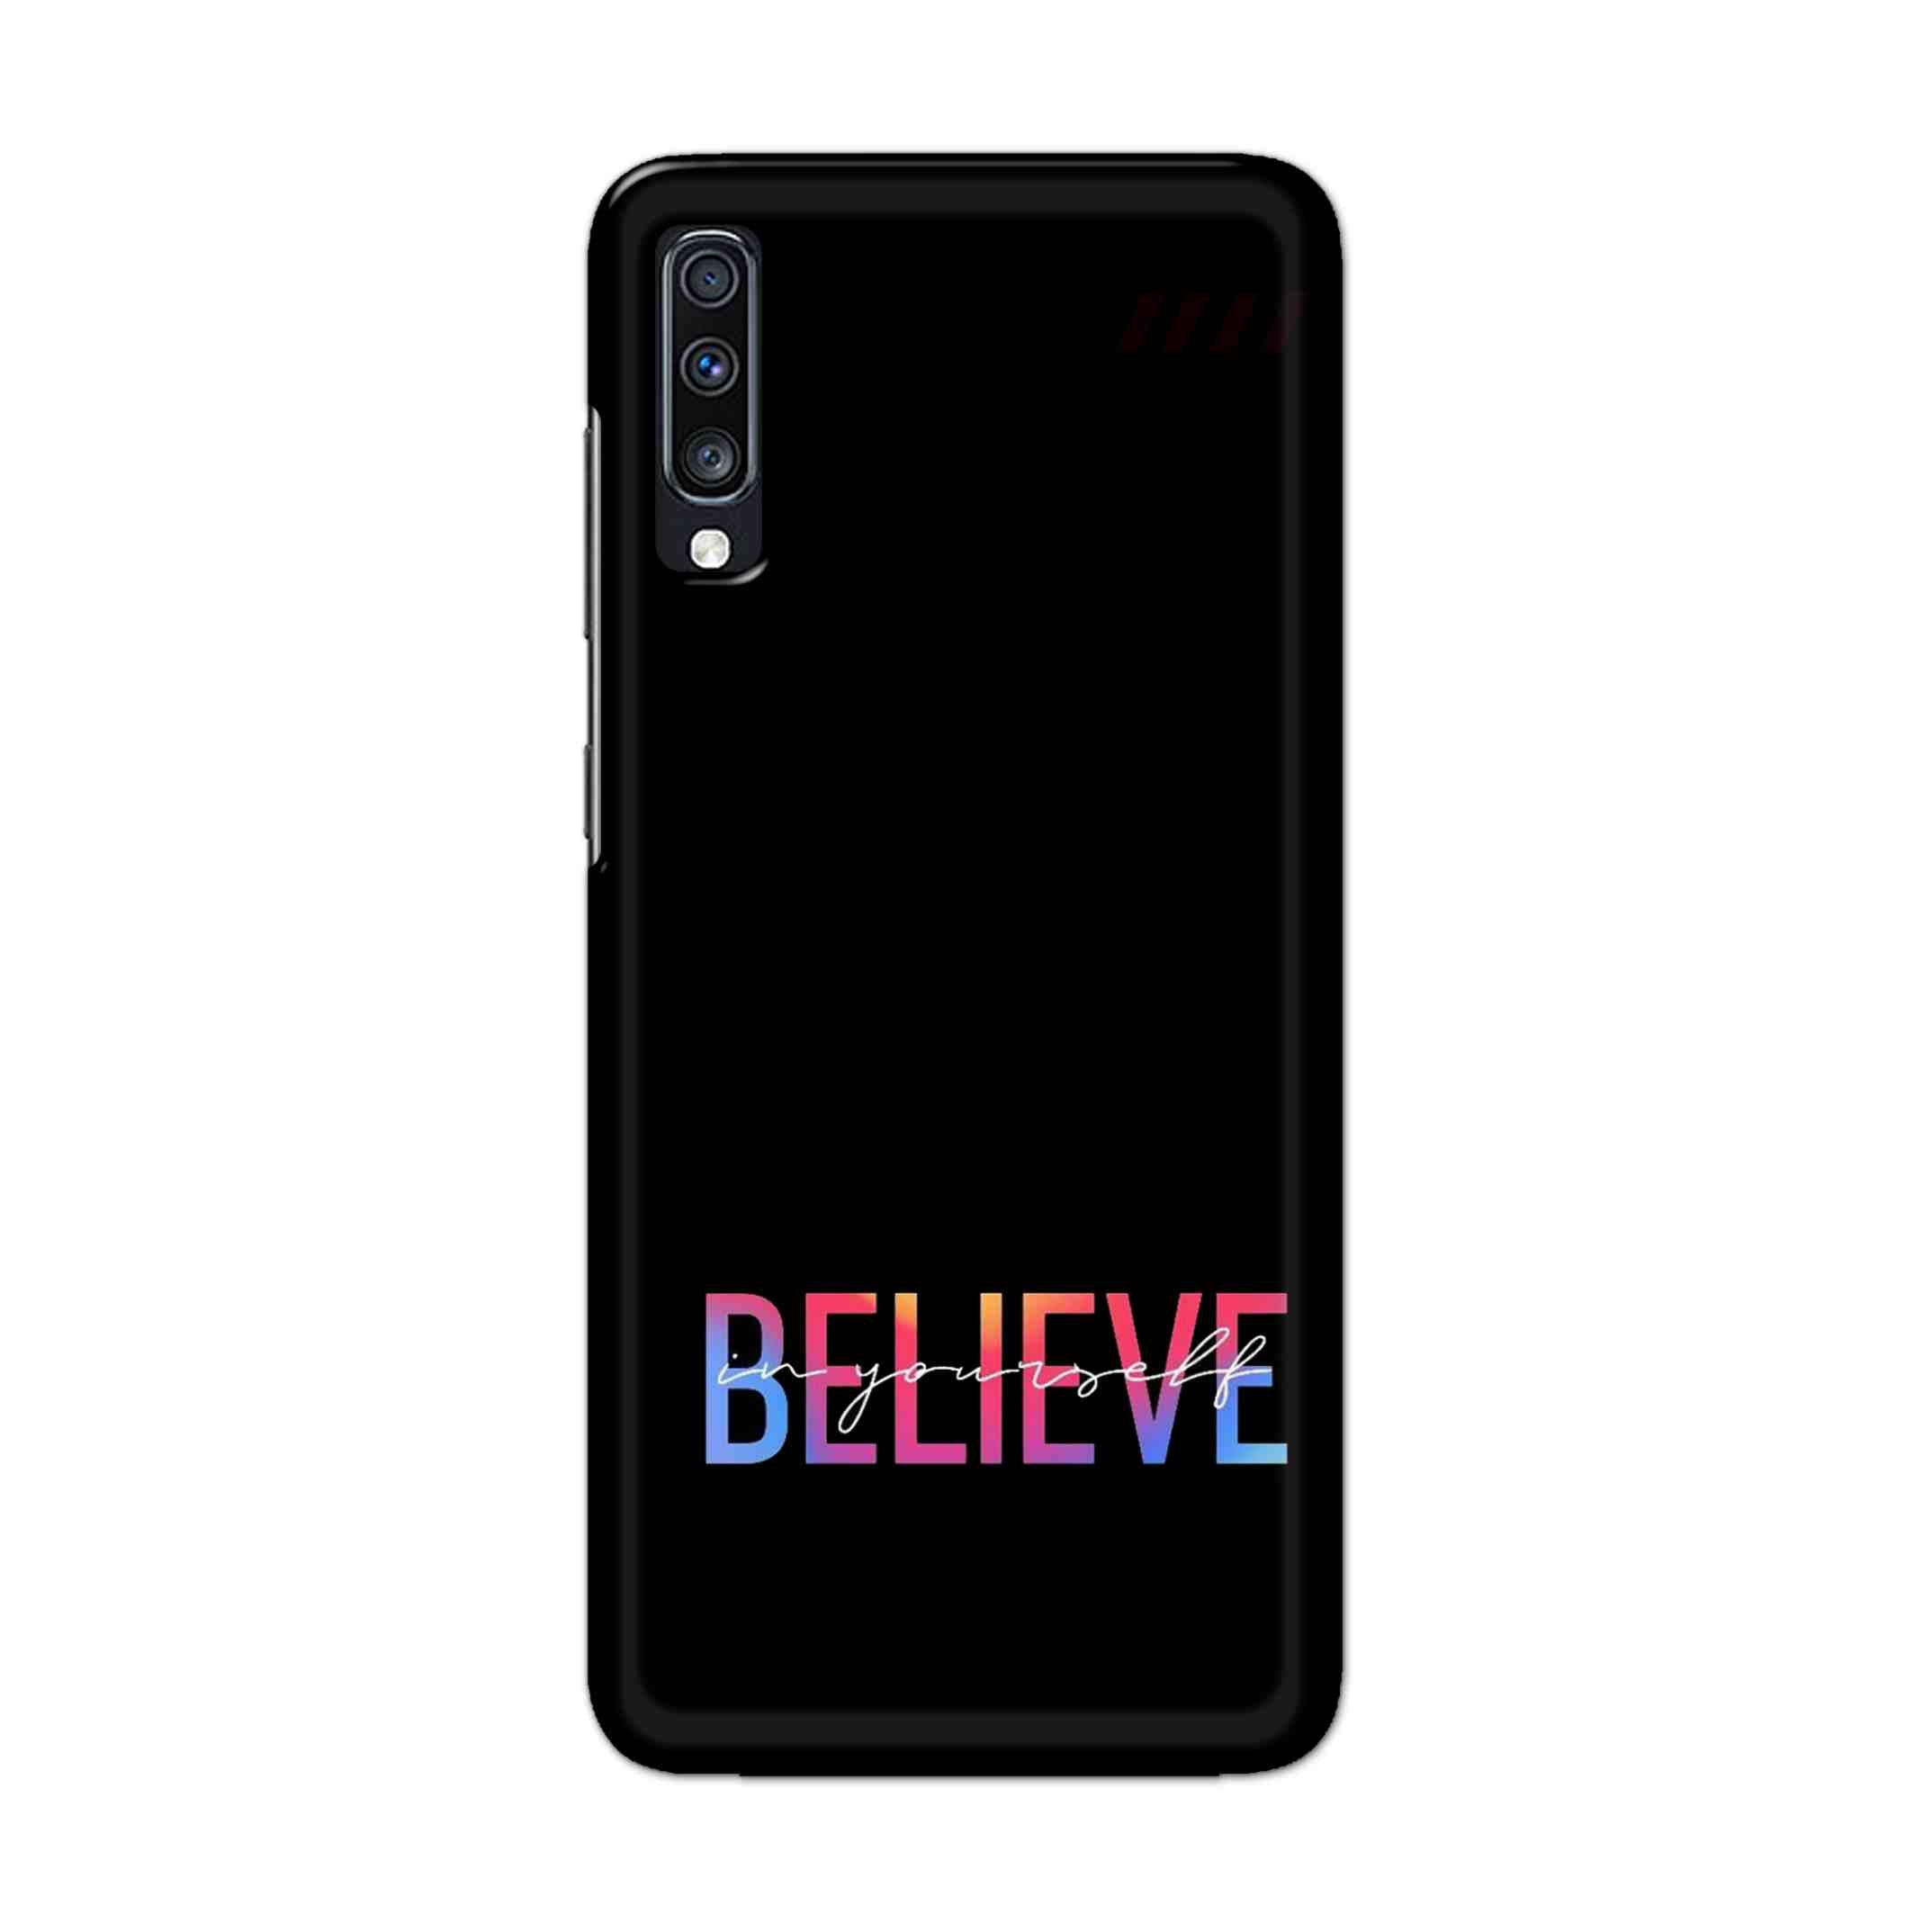 Buy Believe Hard Back Mobile Phone Case Cover For Samsung Galaxy A70 Online